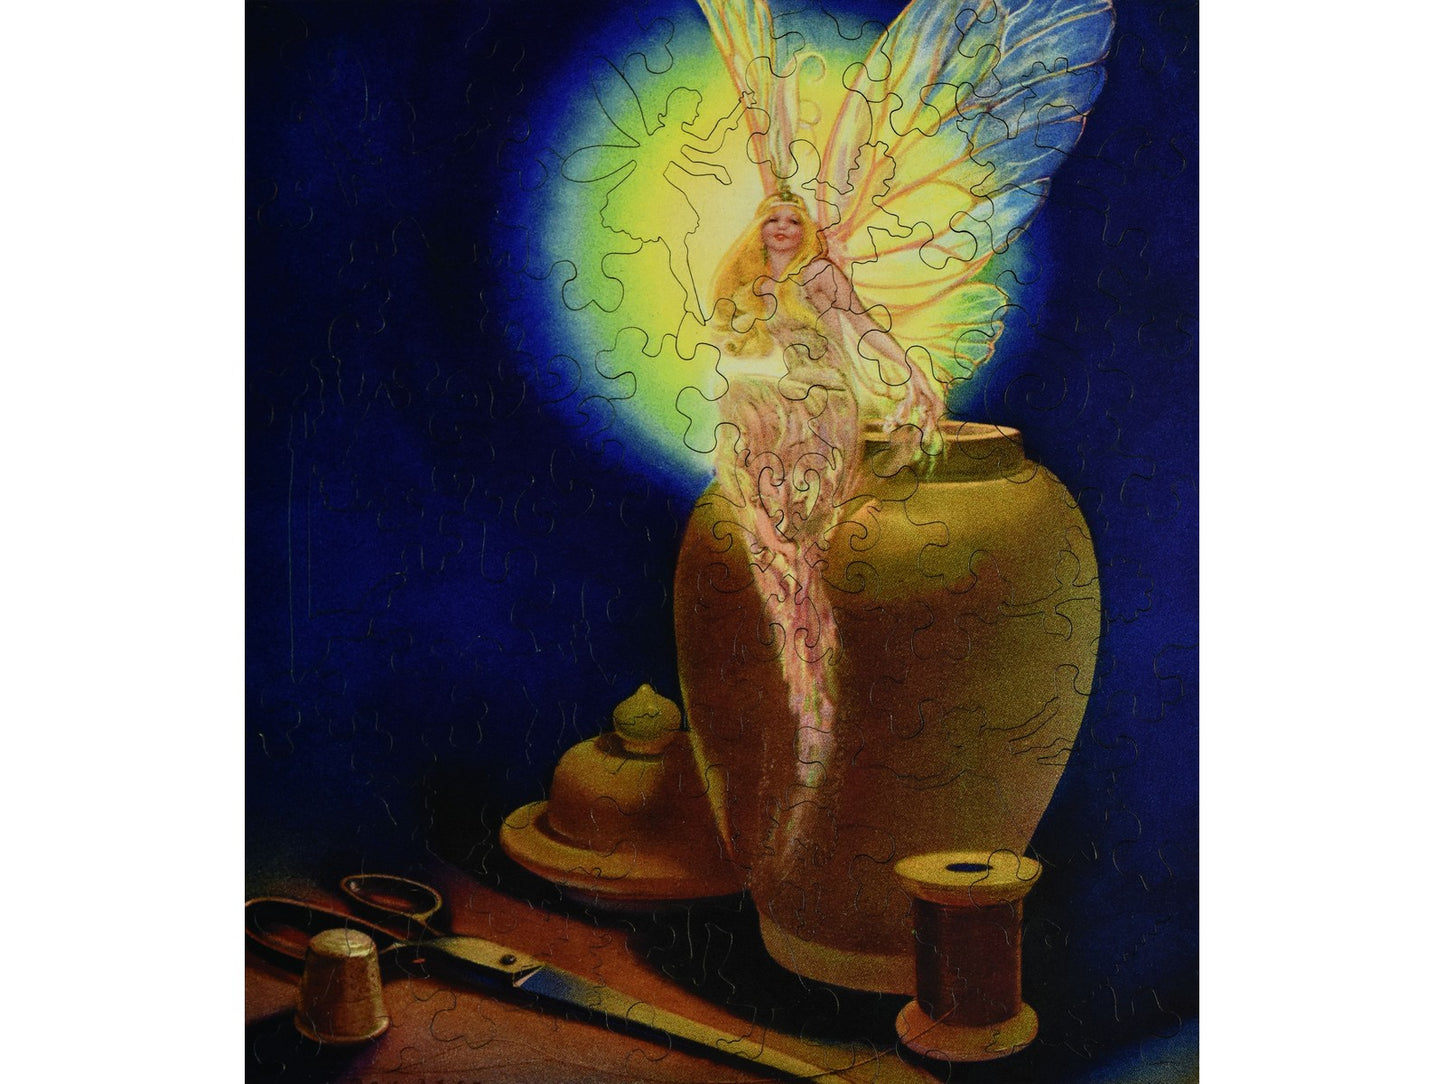 The front of the puzzle, Tinkerbell, which shows a glowing fairy sitting on a jar.